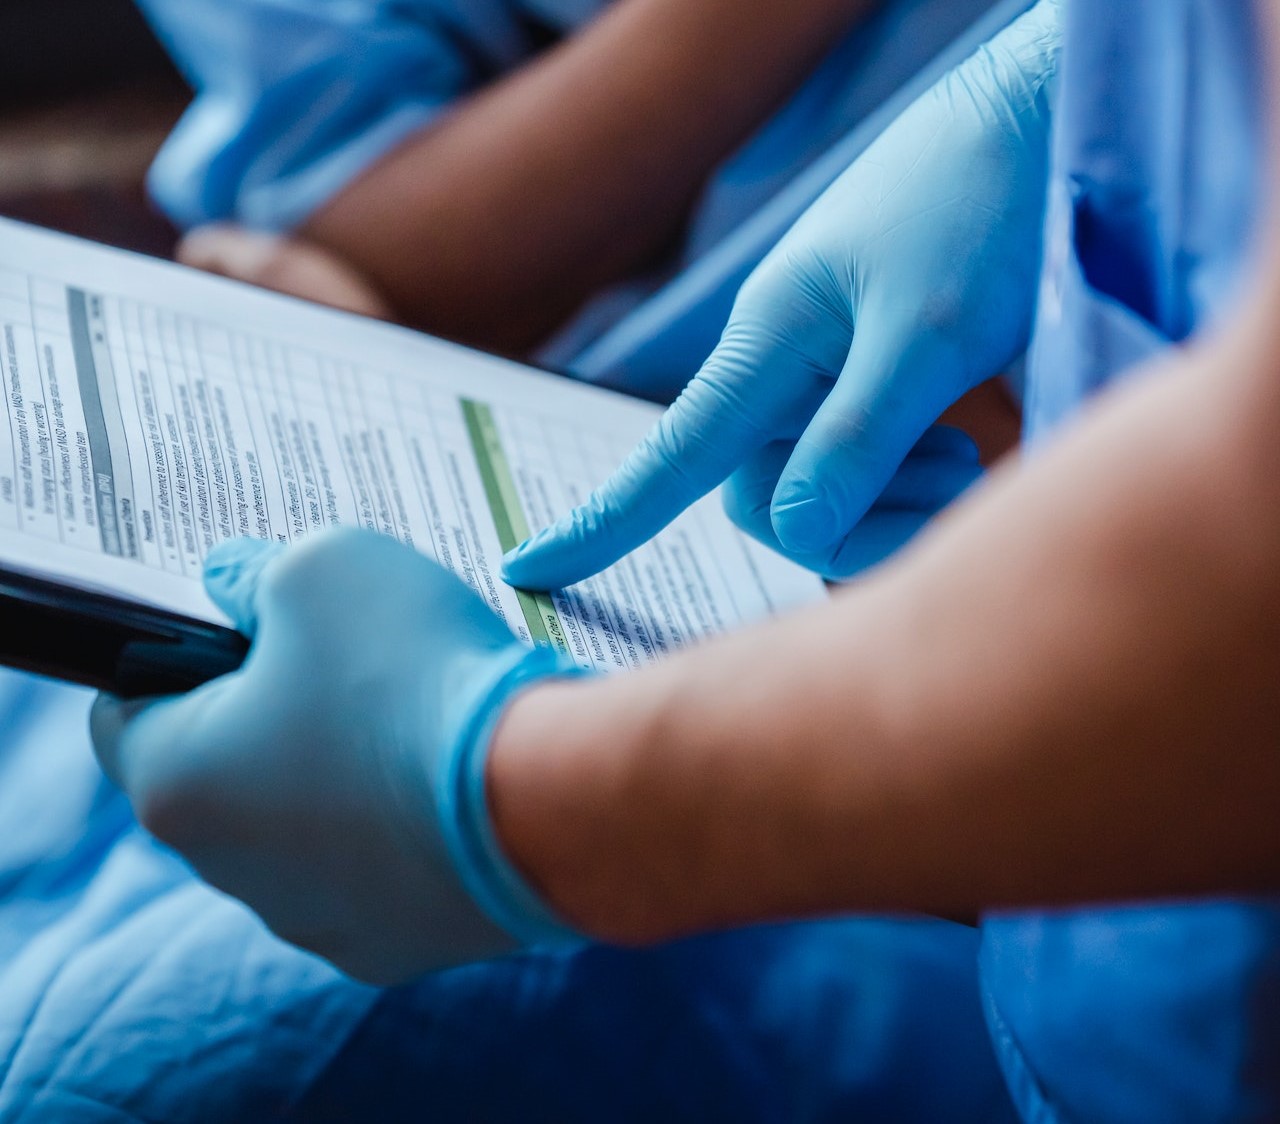 Hospital workers looking over medical records